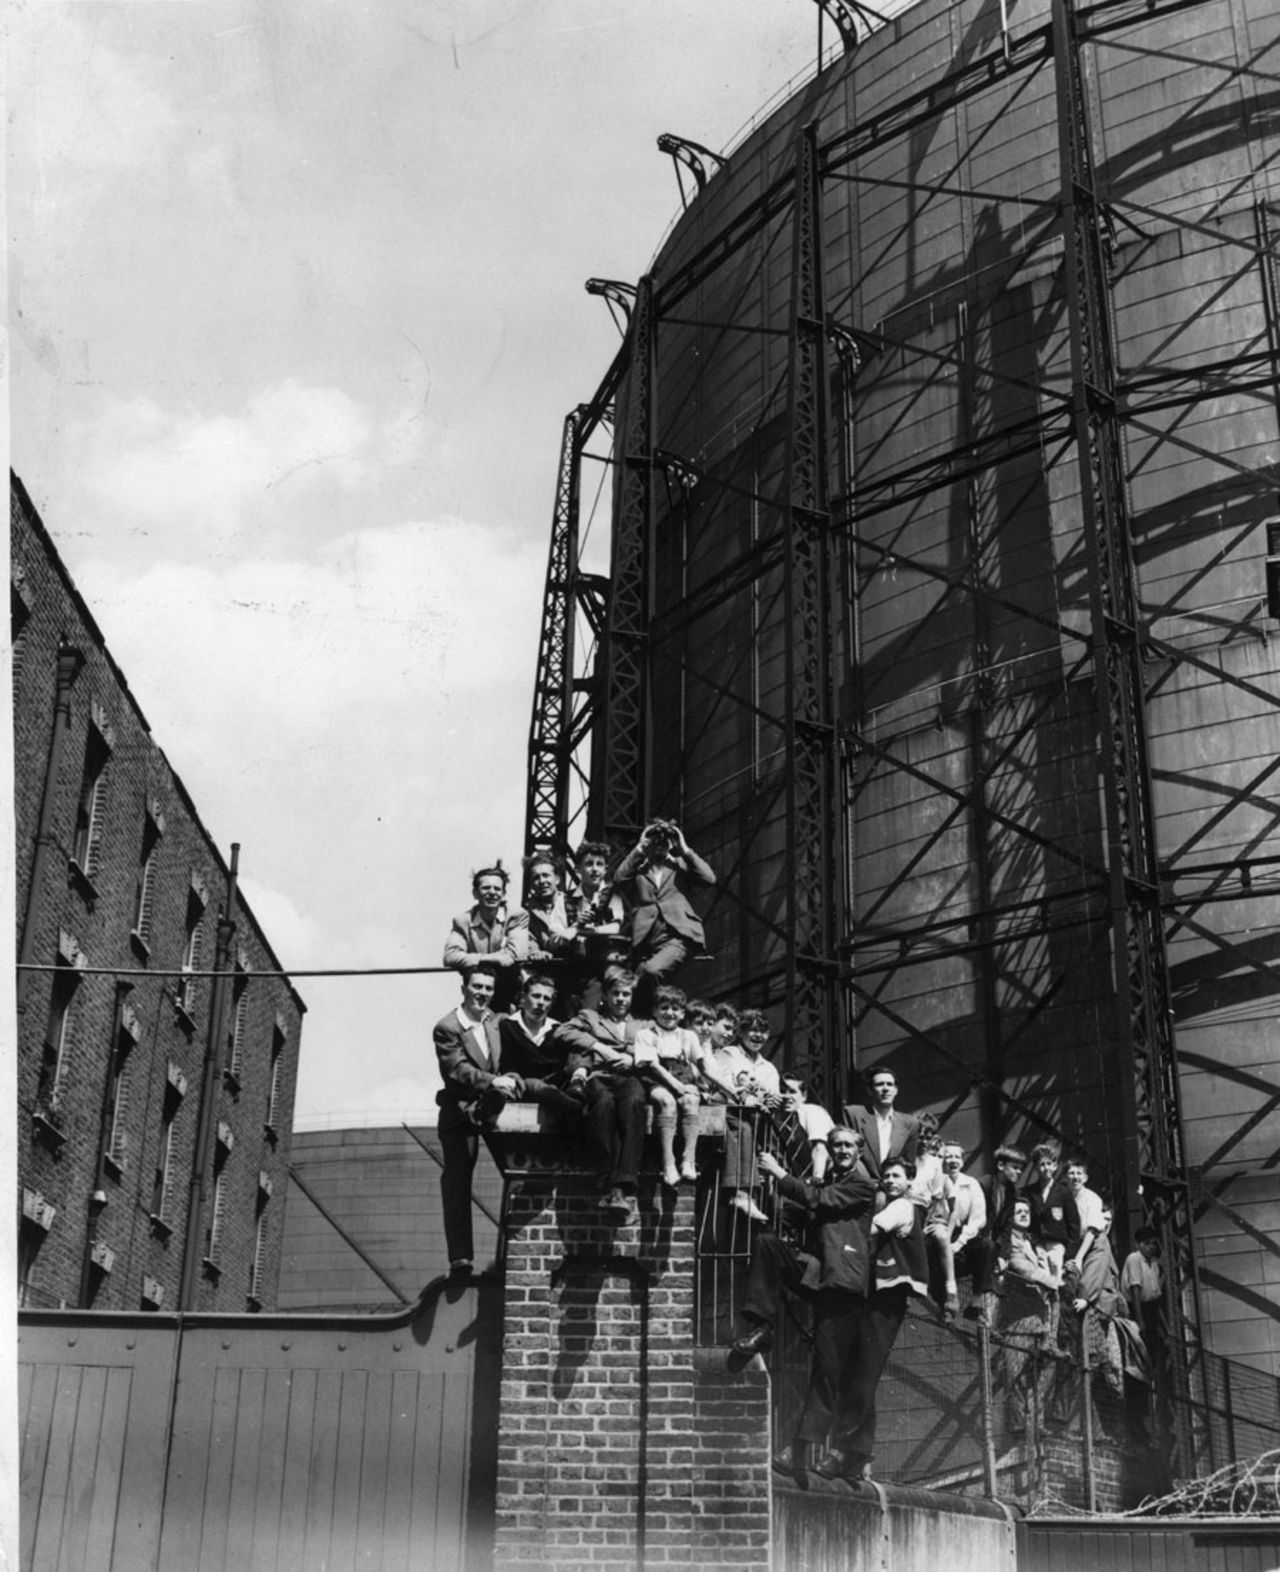 Spectators perch precariously on a wall outside The Oval with the Ashes at stake, England v Australia, The Oval, August 14, 1953